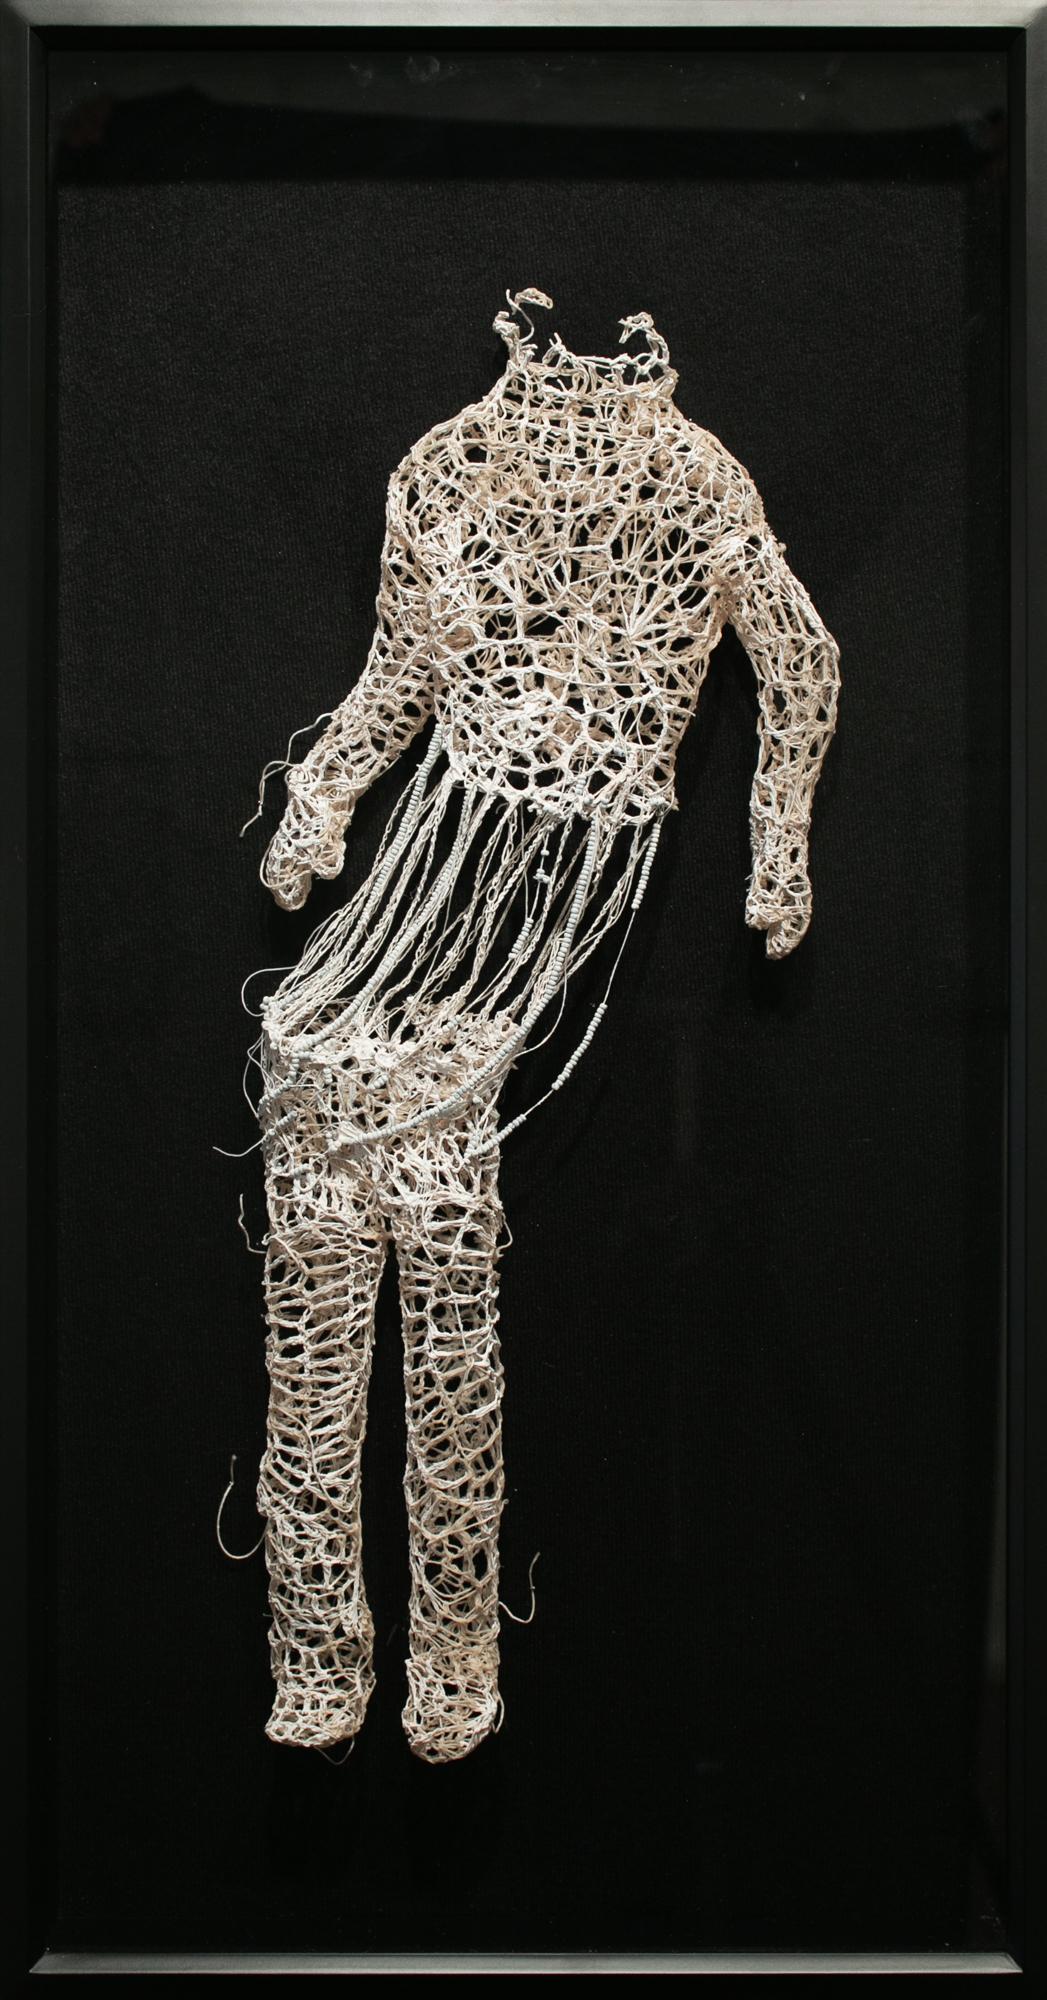 Caitlin McCormack Abstract Sculpture - "Just A Kid", Crochet Sculpture, Textile Art, Biomorphic, White Cotton String